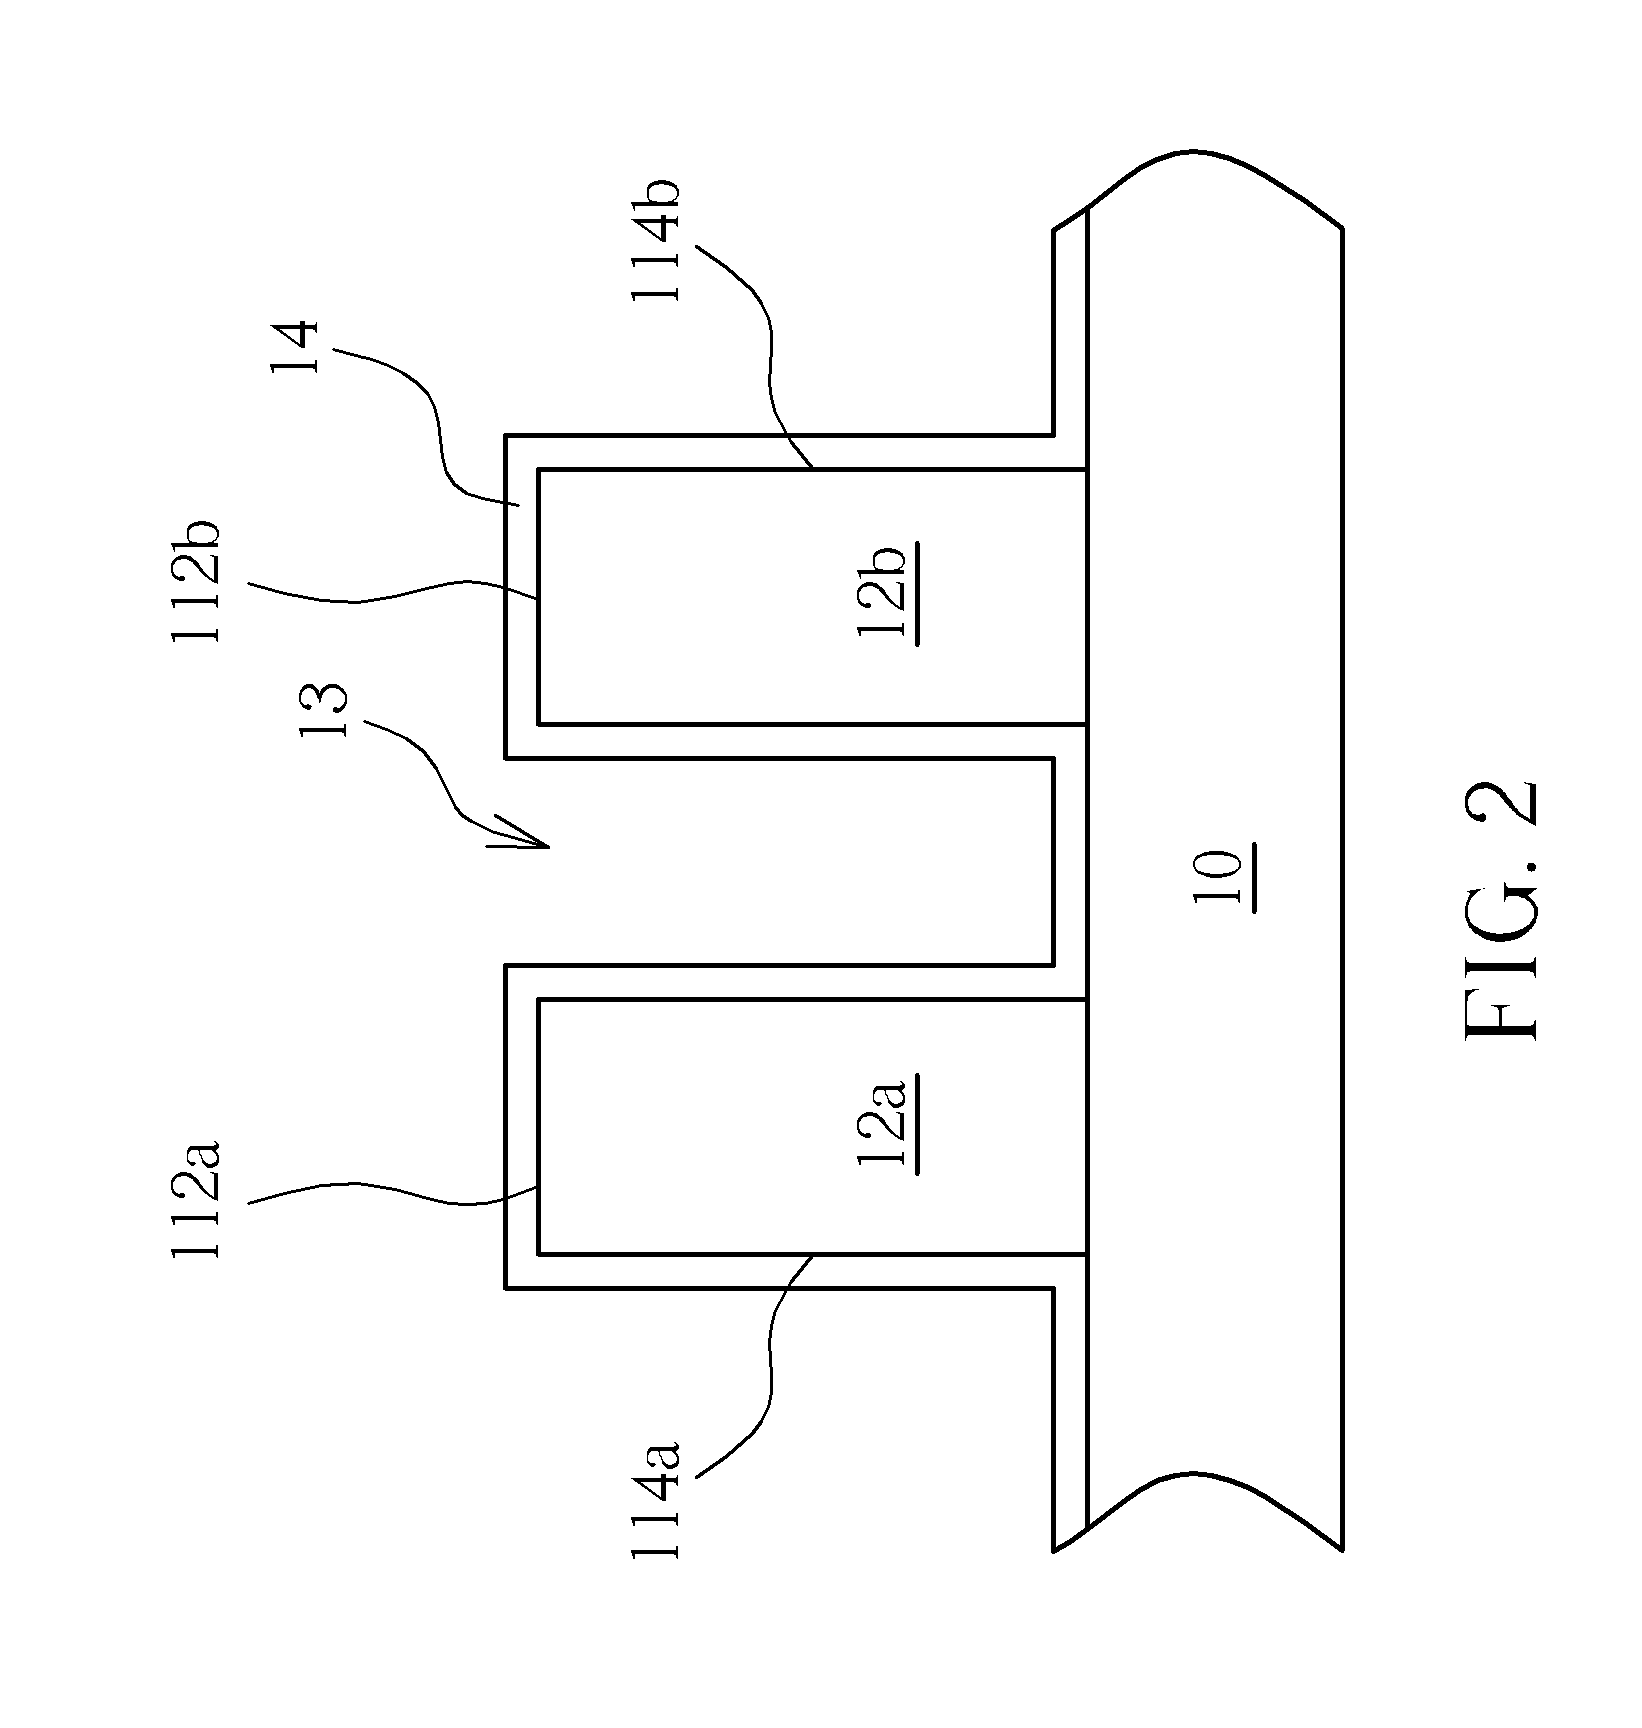 Method for fabricating an integrated circuit